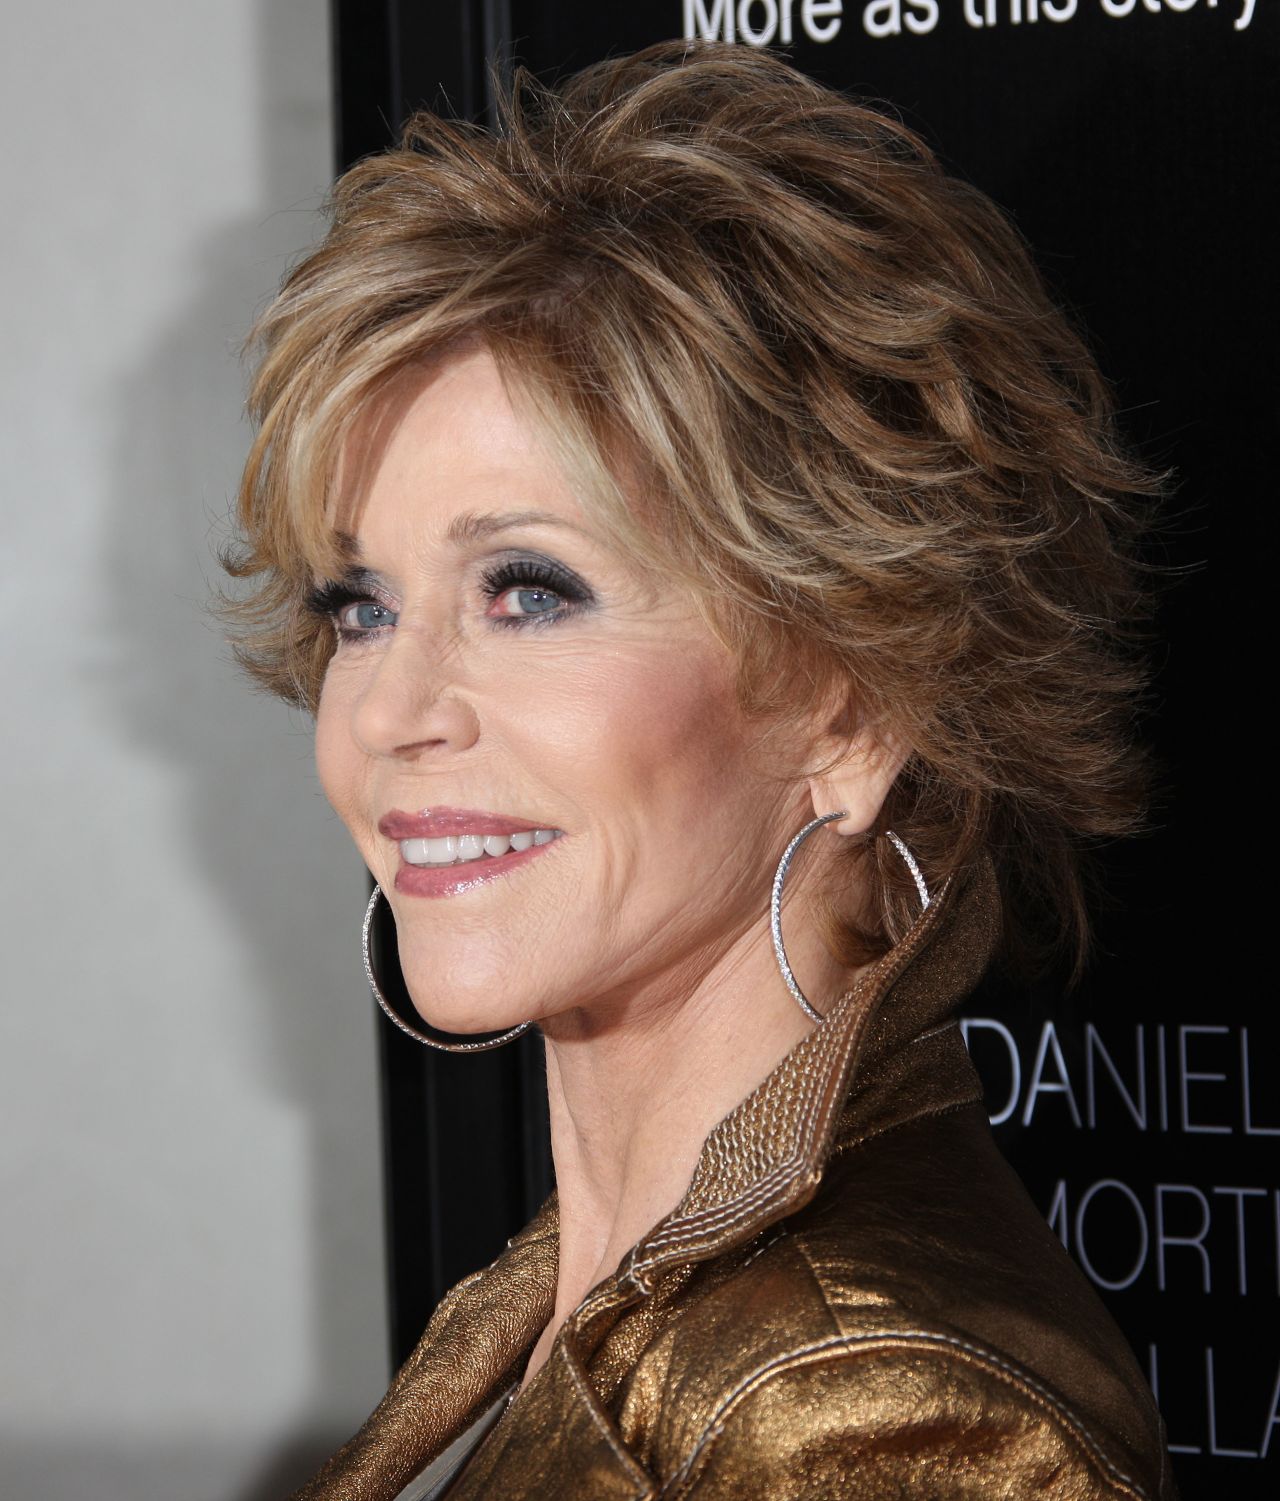 Actress Jane Fonda says she grew up an atheist with no exposure to church until her friends in Georgia taught her about Jesus. She says she became a Christian at the end of her marriage to Ted Turner in 2001. 